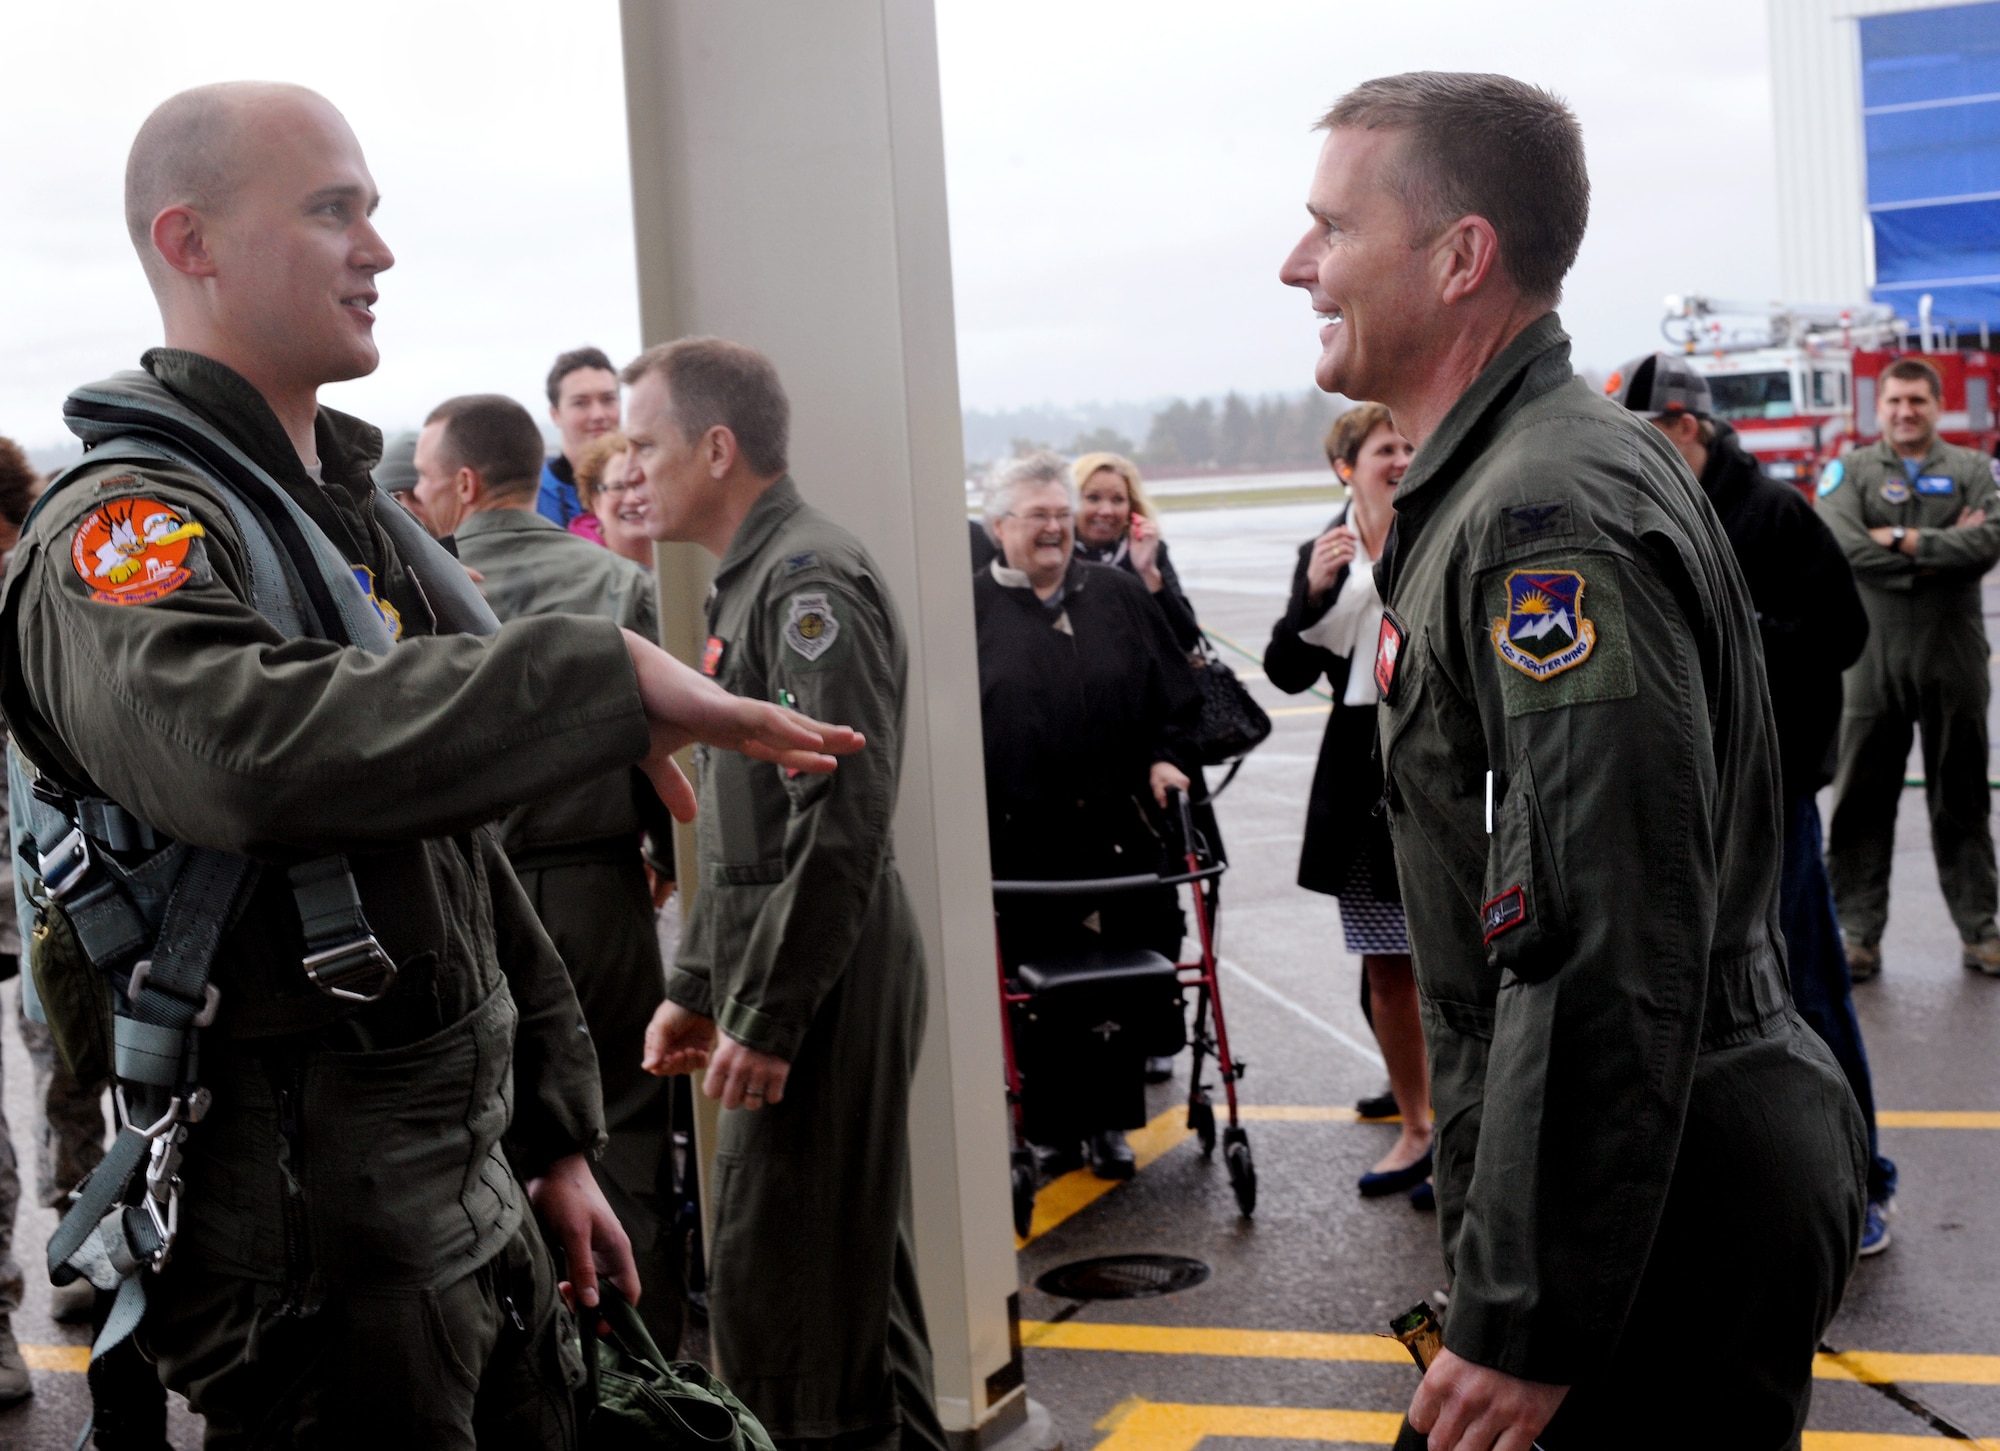 Air National Guard Col. Richard W. Wedan, right, exchanges a word with his son, Air Force 2nd Lt. Steven Wedan, after they flew in formation together Feb. 7, 2015, at Portland Air National Guard Base, Ore. The flight was Col. Wedan’s last in an F-15 Eagle and as commander of the 142nd Fighter Wing. Lt. Wedan flew in the backseat of Col. Wedan’s wingman jet, piloted by Col. Paul T. Fitzgerald, 142nd Fighter Wing Vice Commander. Col. Fitzgerald assumed command of the wing during a ceremony held here Feb. 7. Lt. Wedan is scheduled to graduate from Air Force pilot training next week. (U.S. Air National Guard photo by Tech. Sgt. John Hughel, 142nd Fighter Wing Public Affairs/Released)